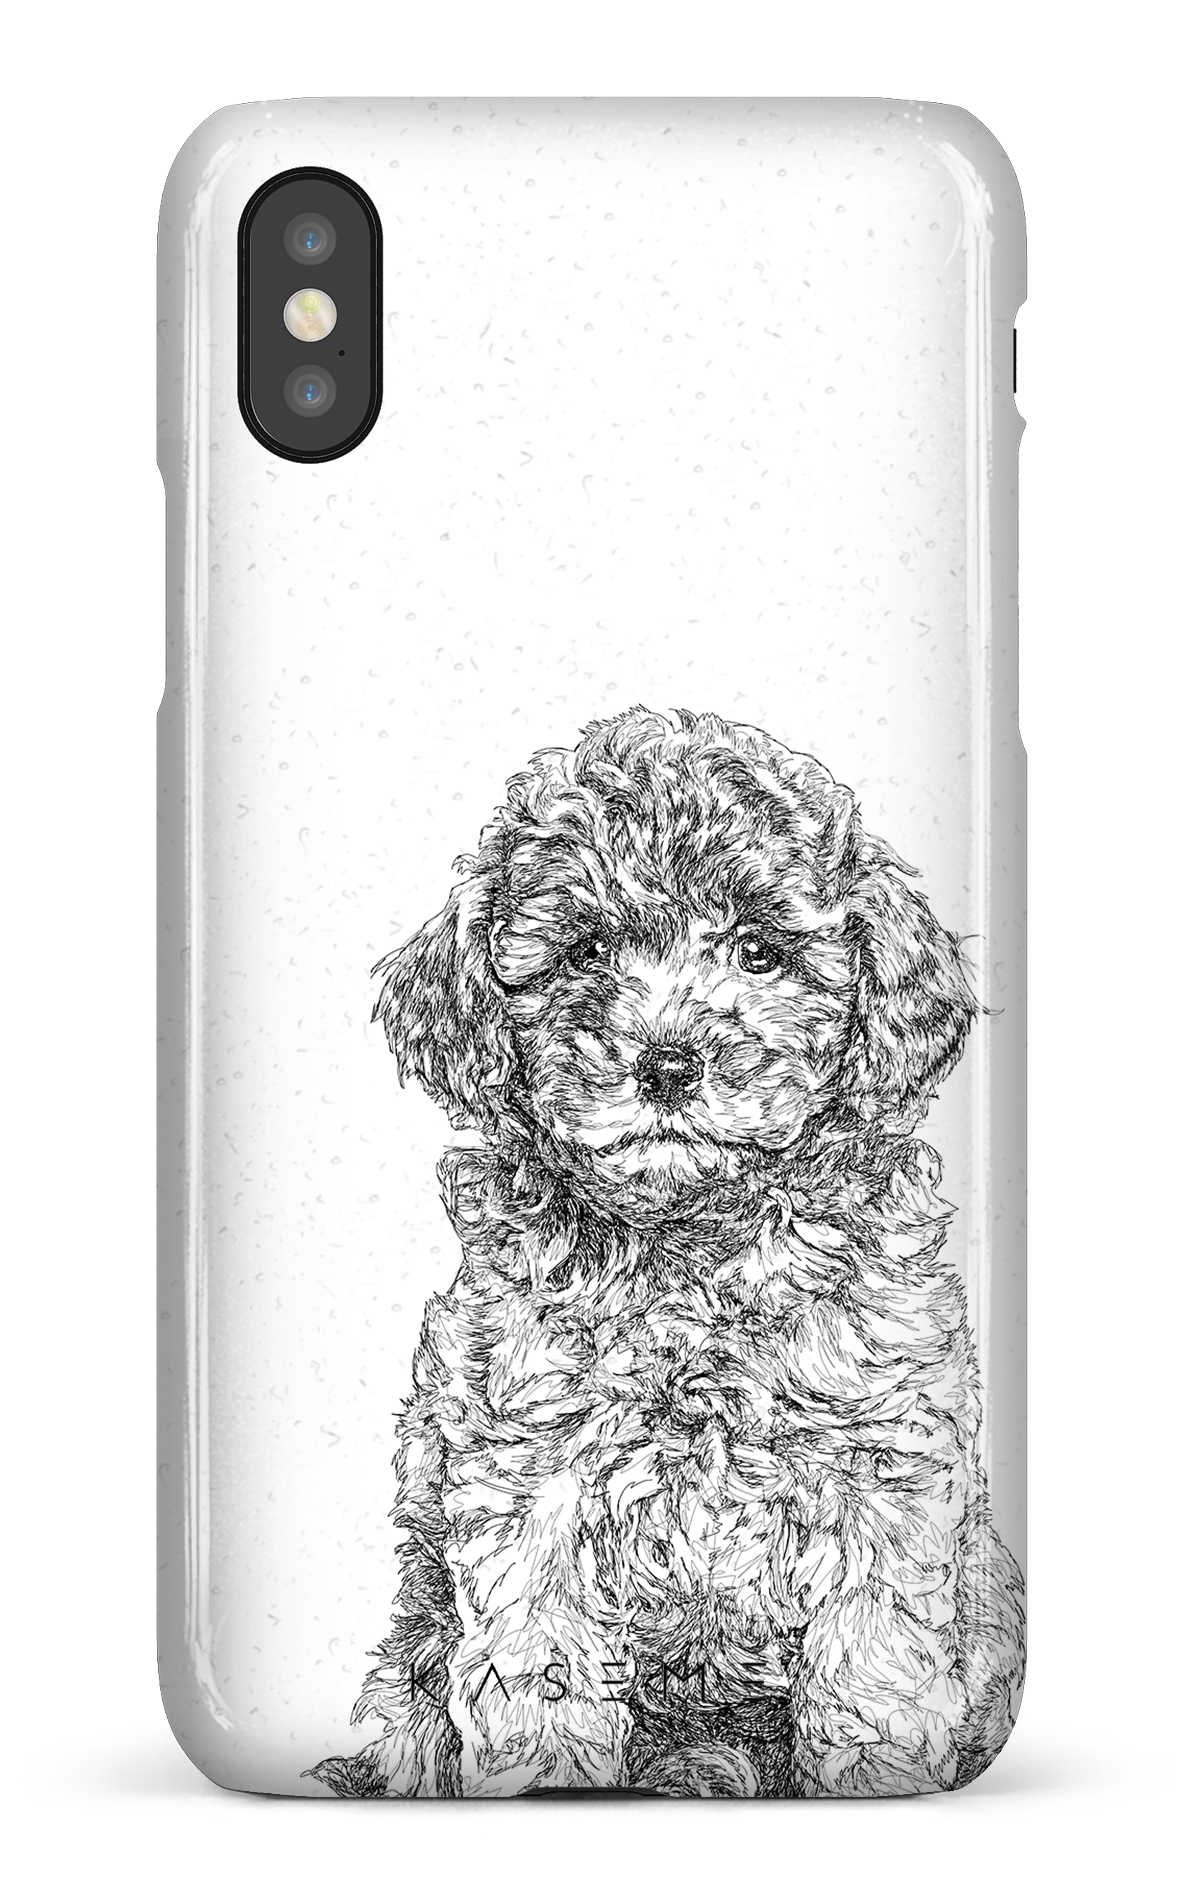 Toy Poodle - iPhone X/Xs